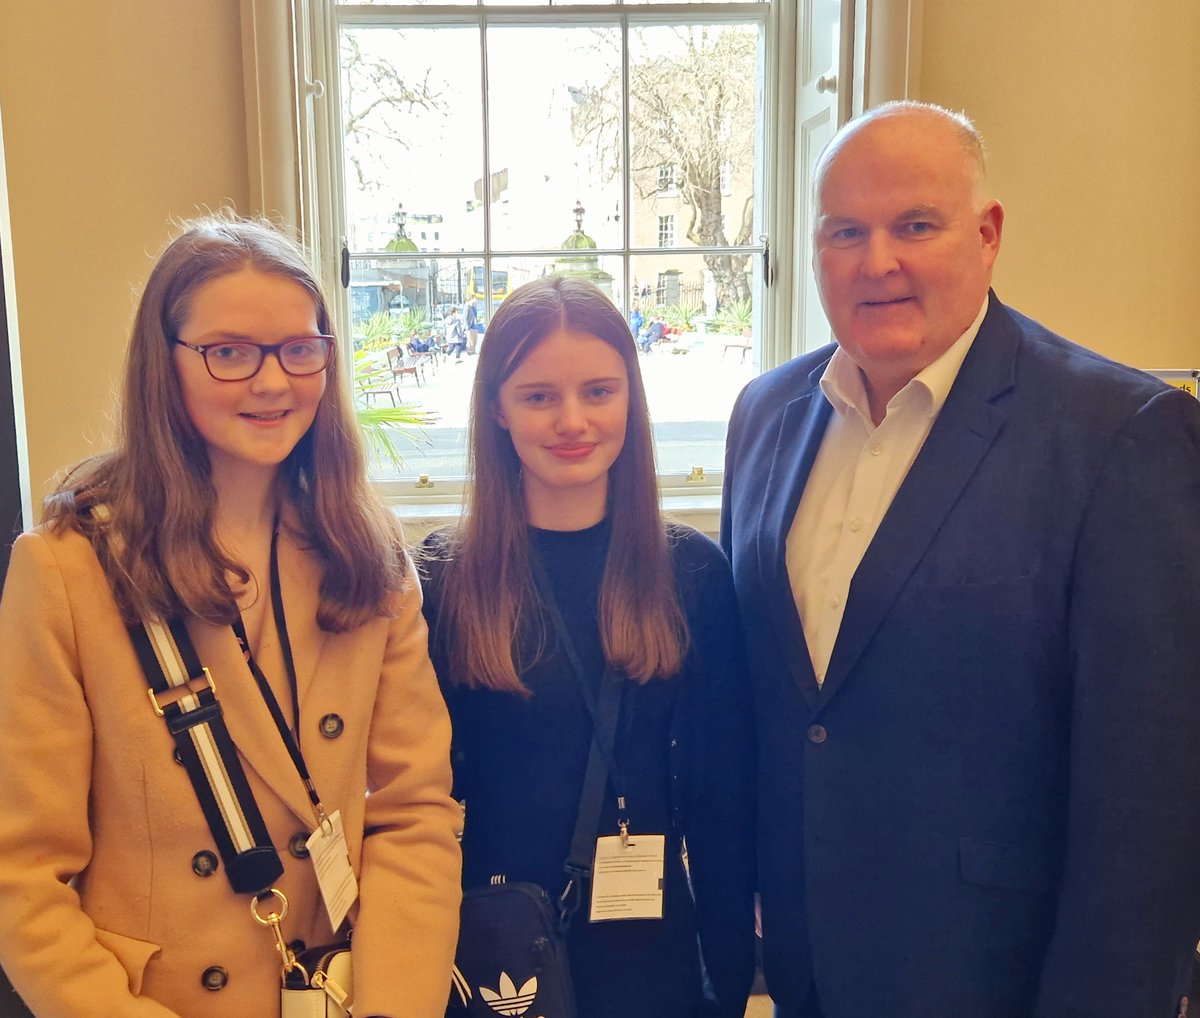 Lovely to meet Drumlish student,  Niamh Lillis, and her @WilsonsHospital classmate, Emily O'Donnell in the Dáil today. The duo are on work experience with the great @MichaelFitzmau1 and there's nothing they won't know by week's end!